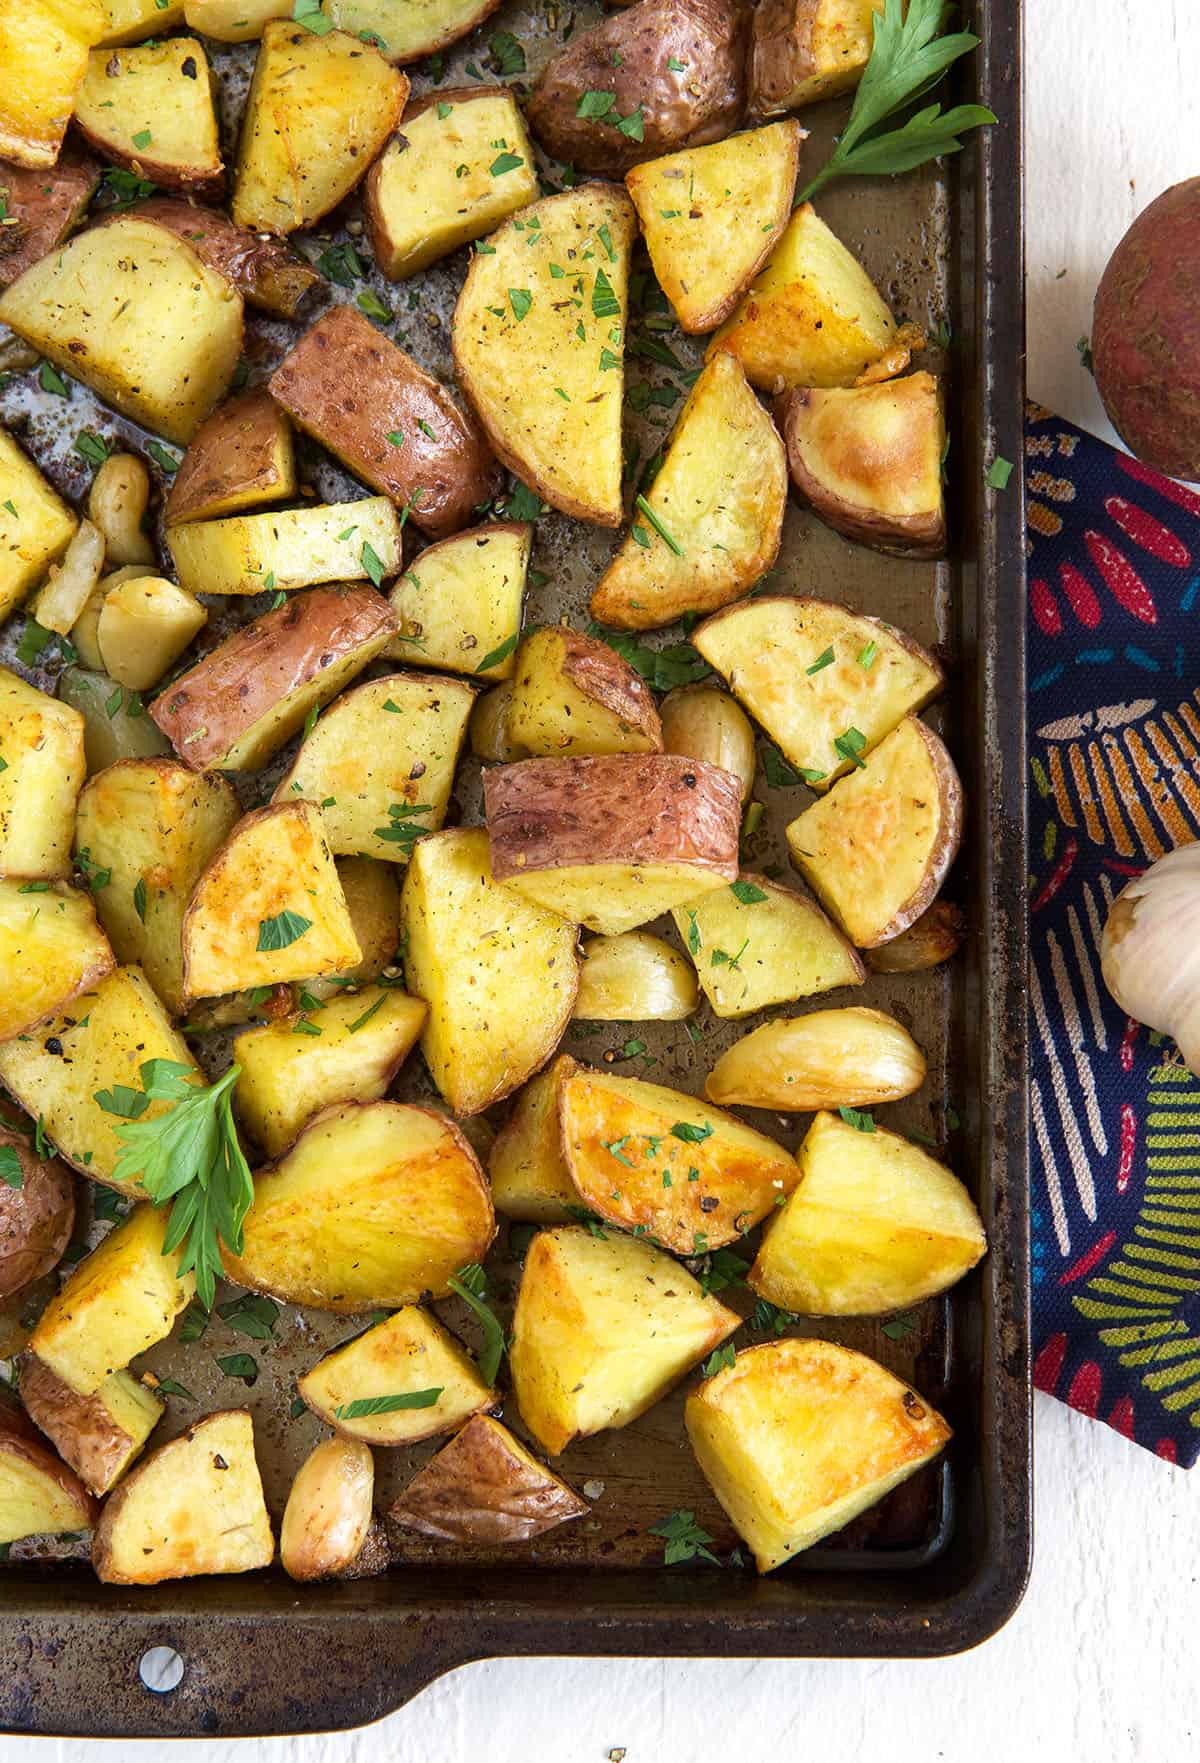 Potatoes have been roasted and garnished on a baking sheet.